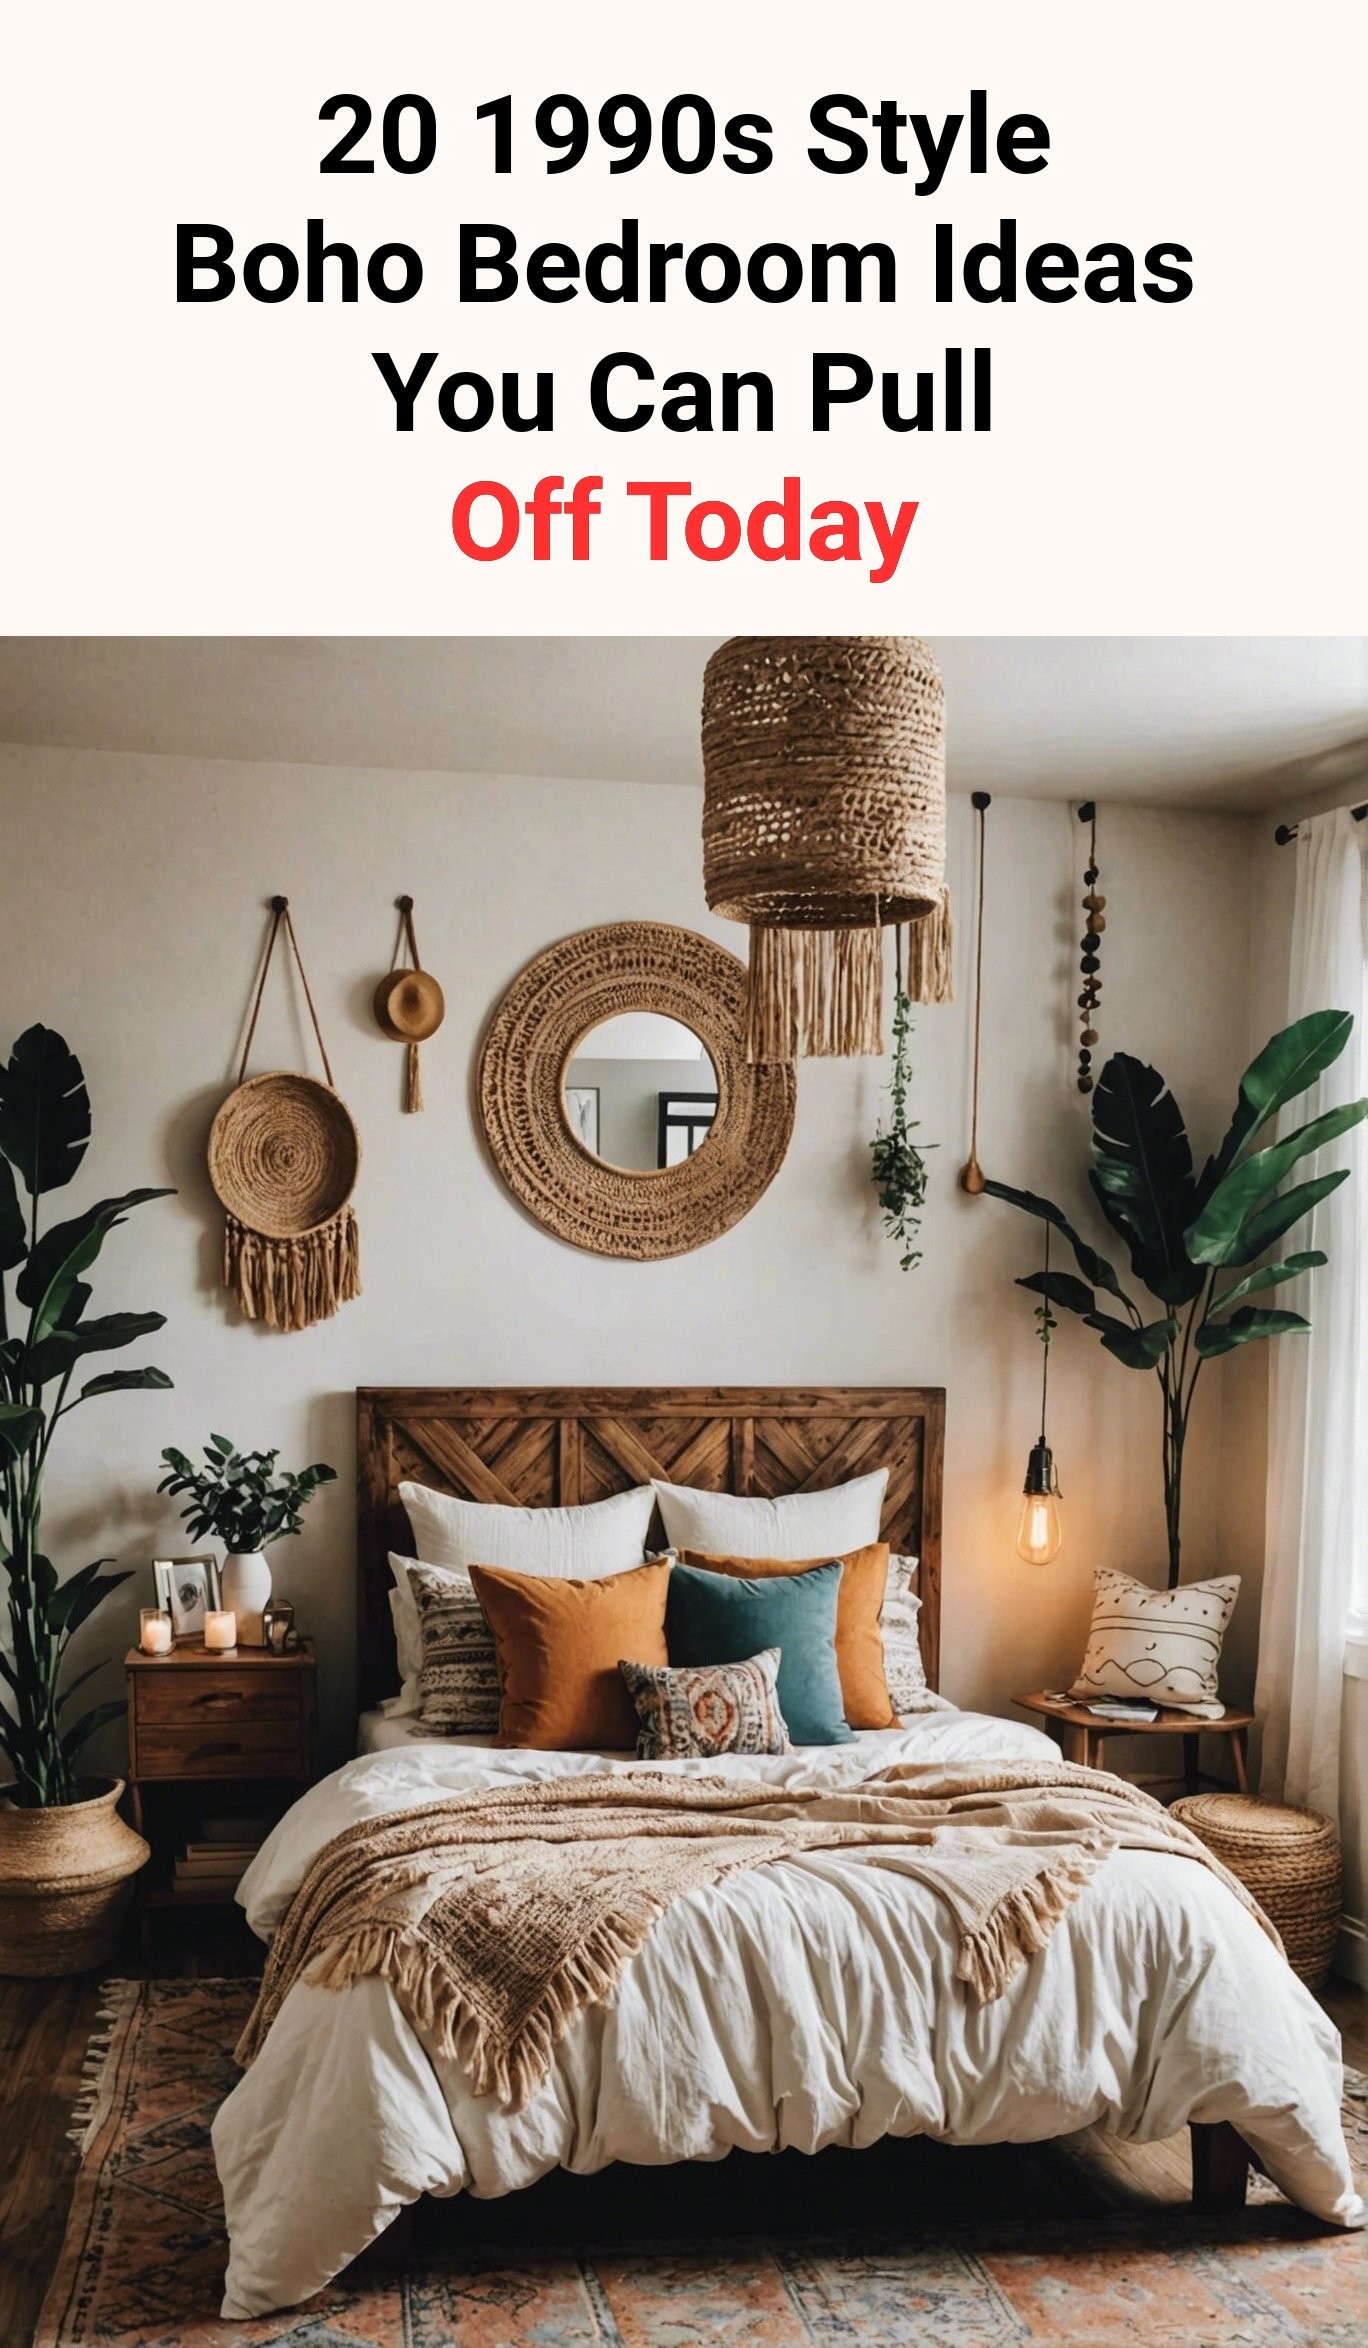 20 1990s Style Boho Bedroom Ideas You Can Pull Off Today